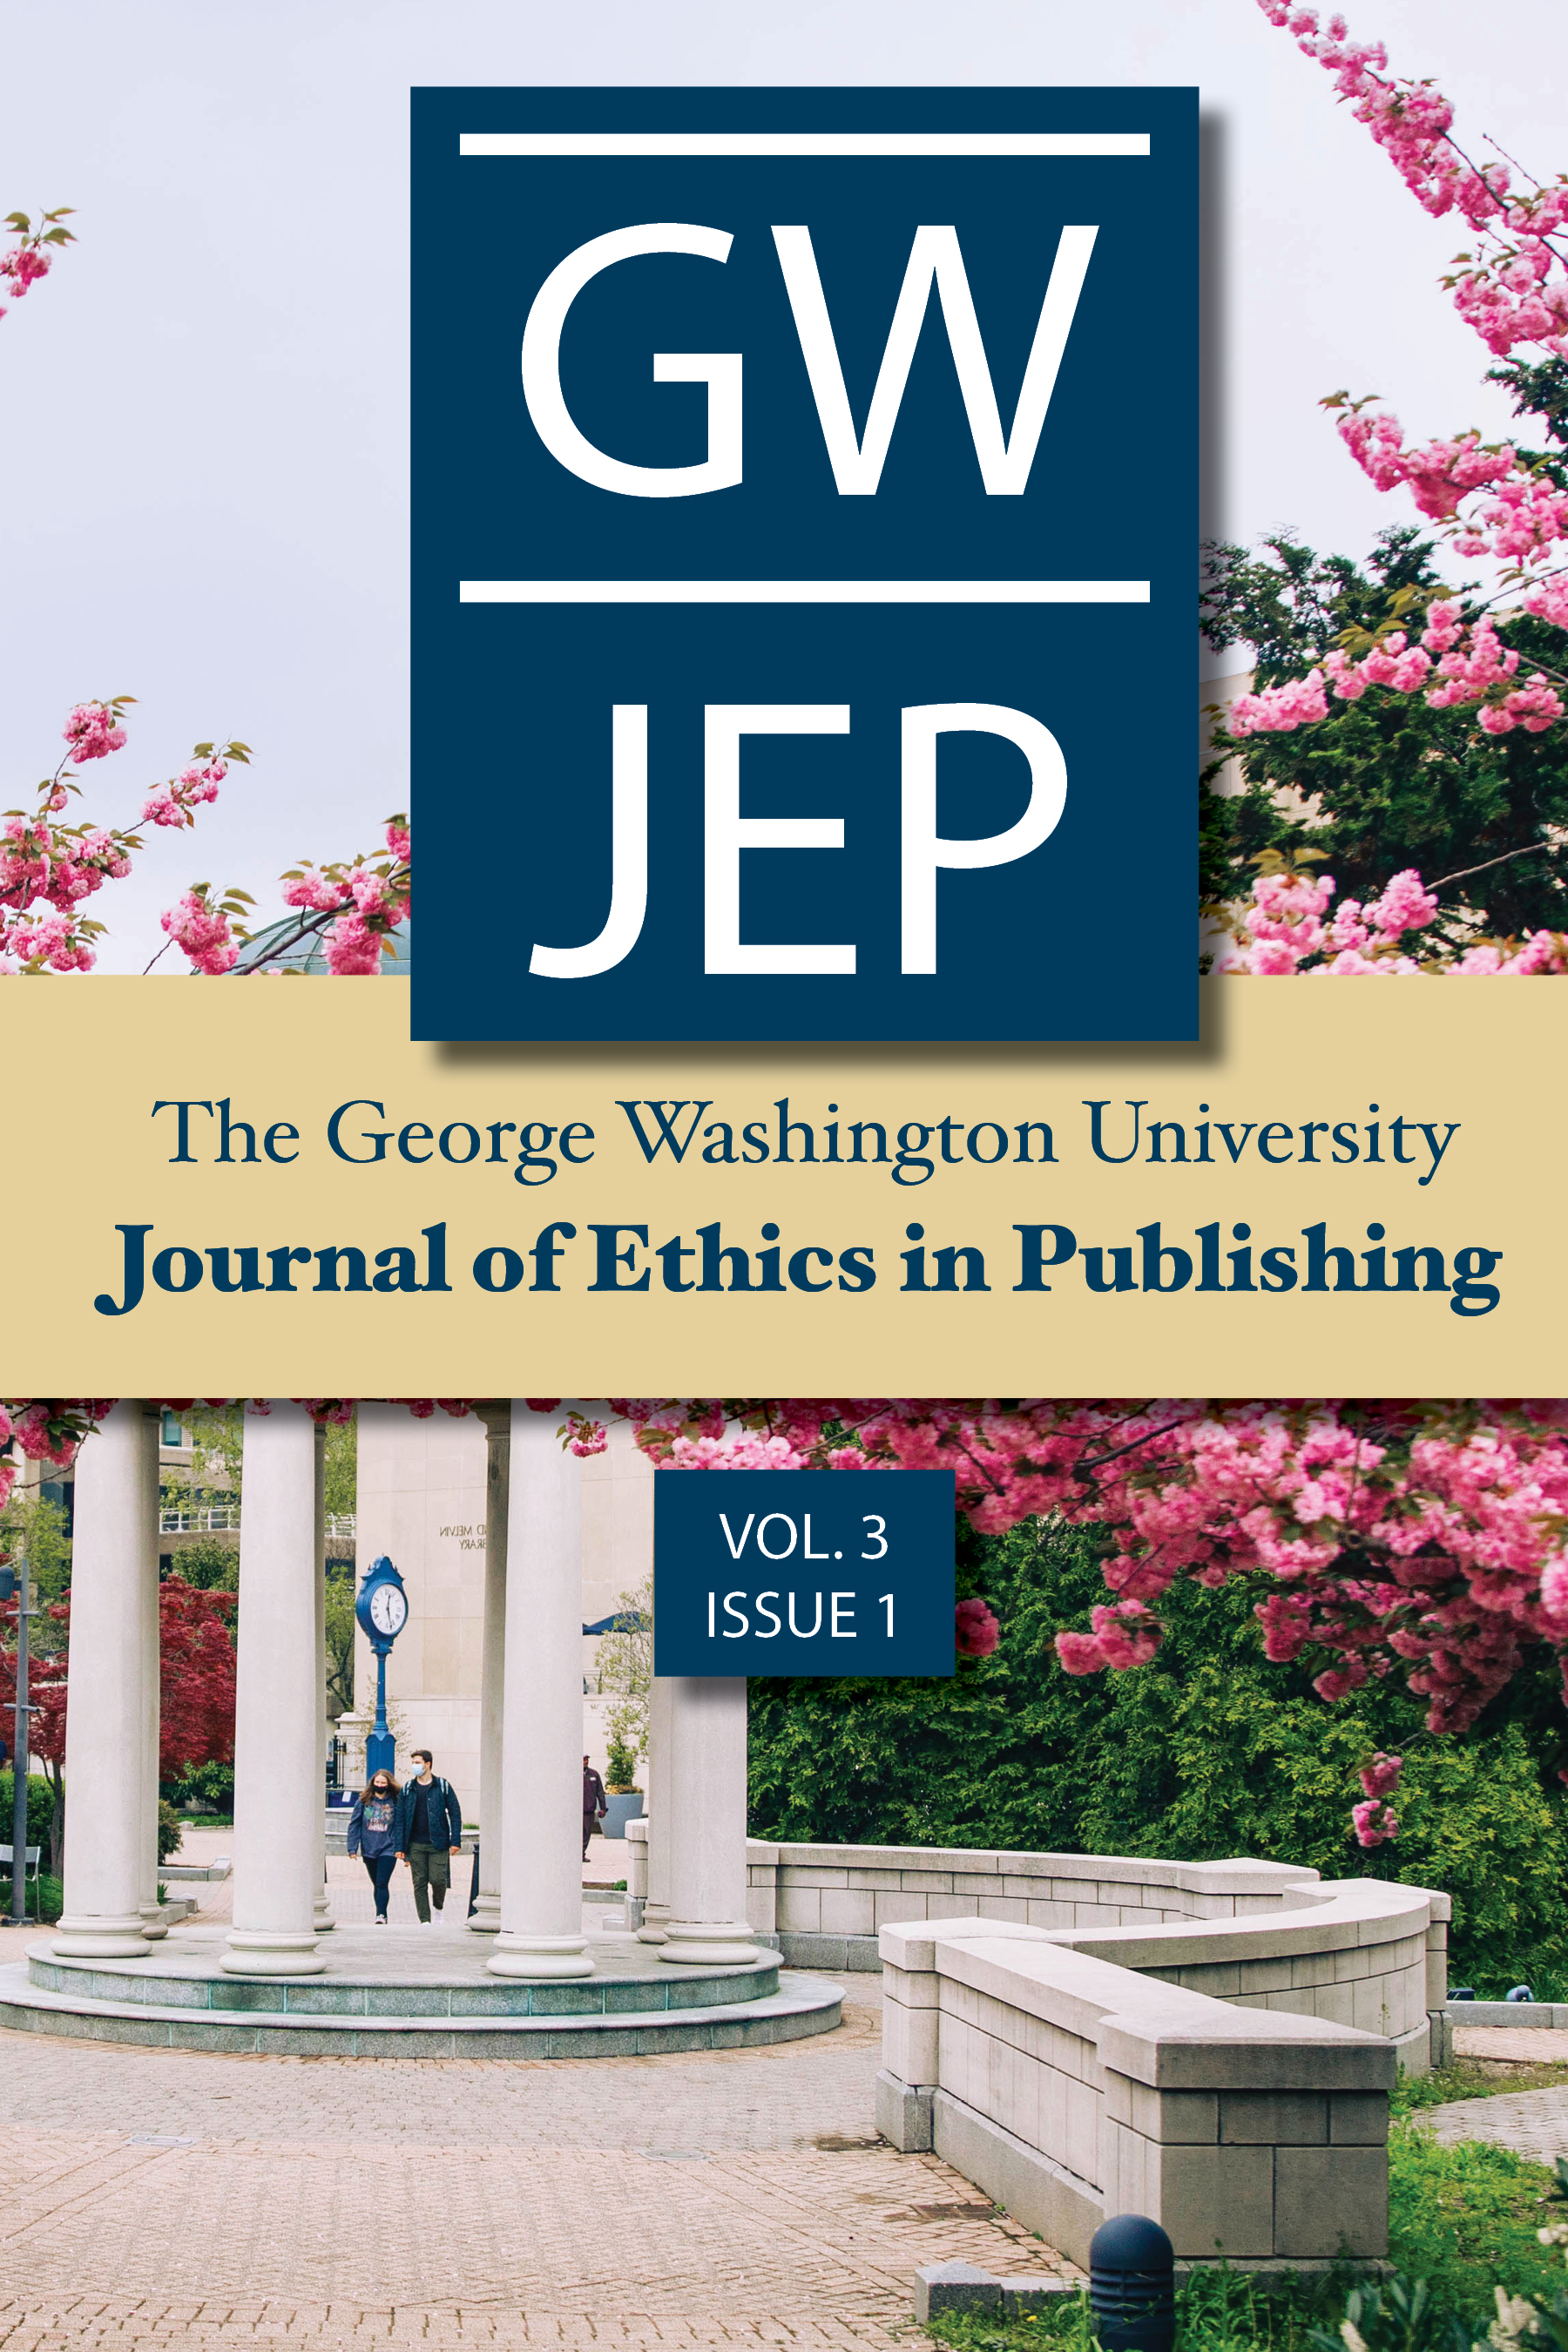 GW Journal of Ethics in Publishing